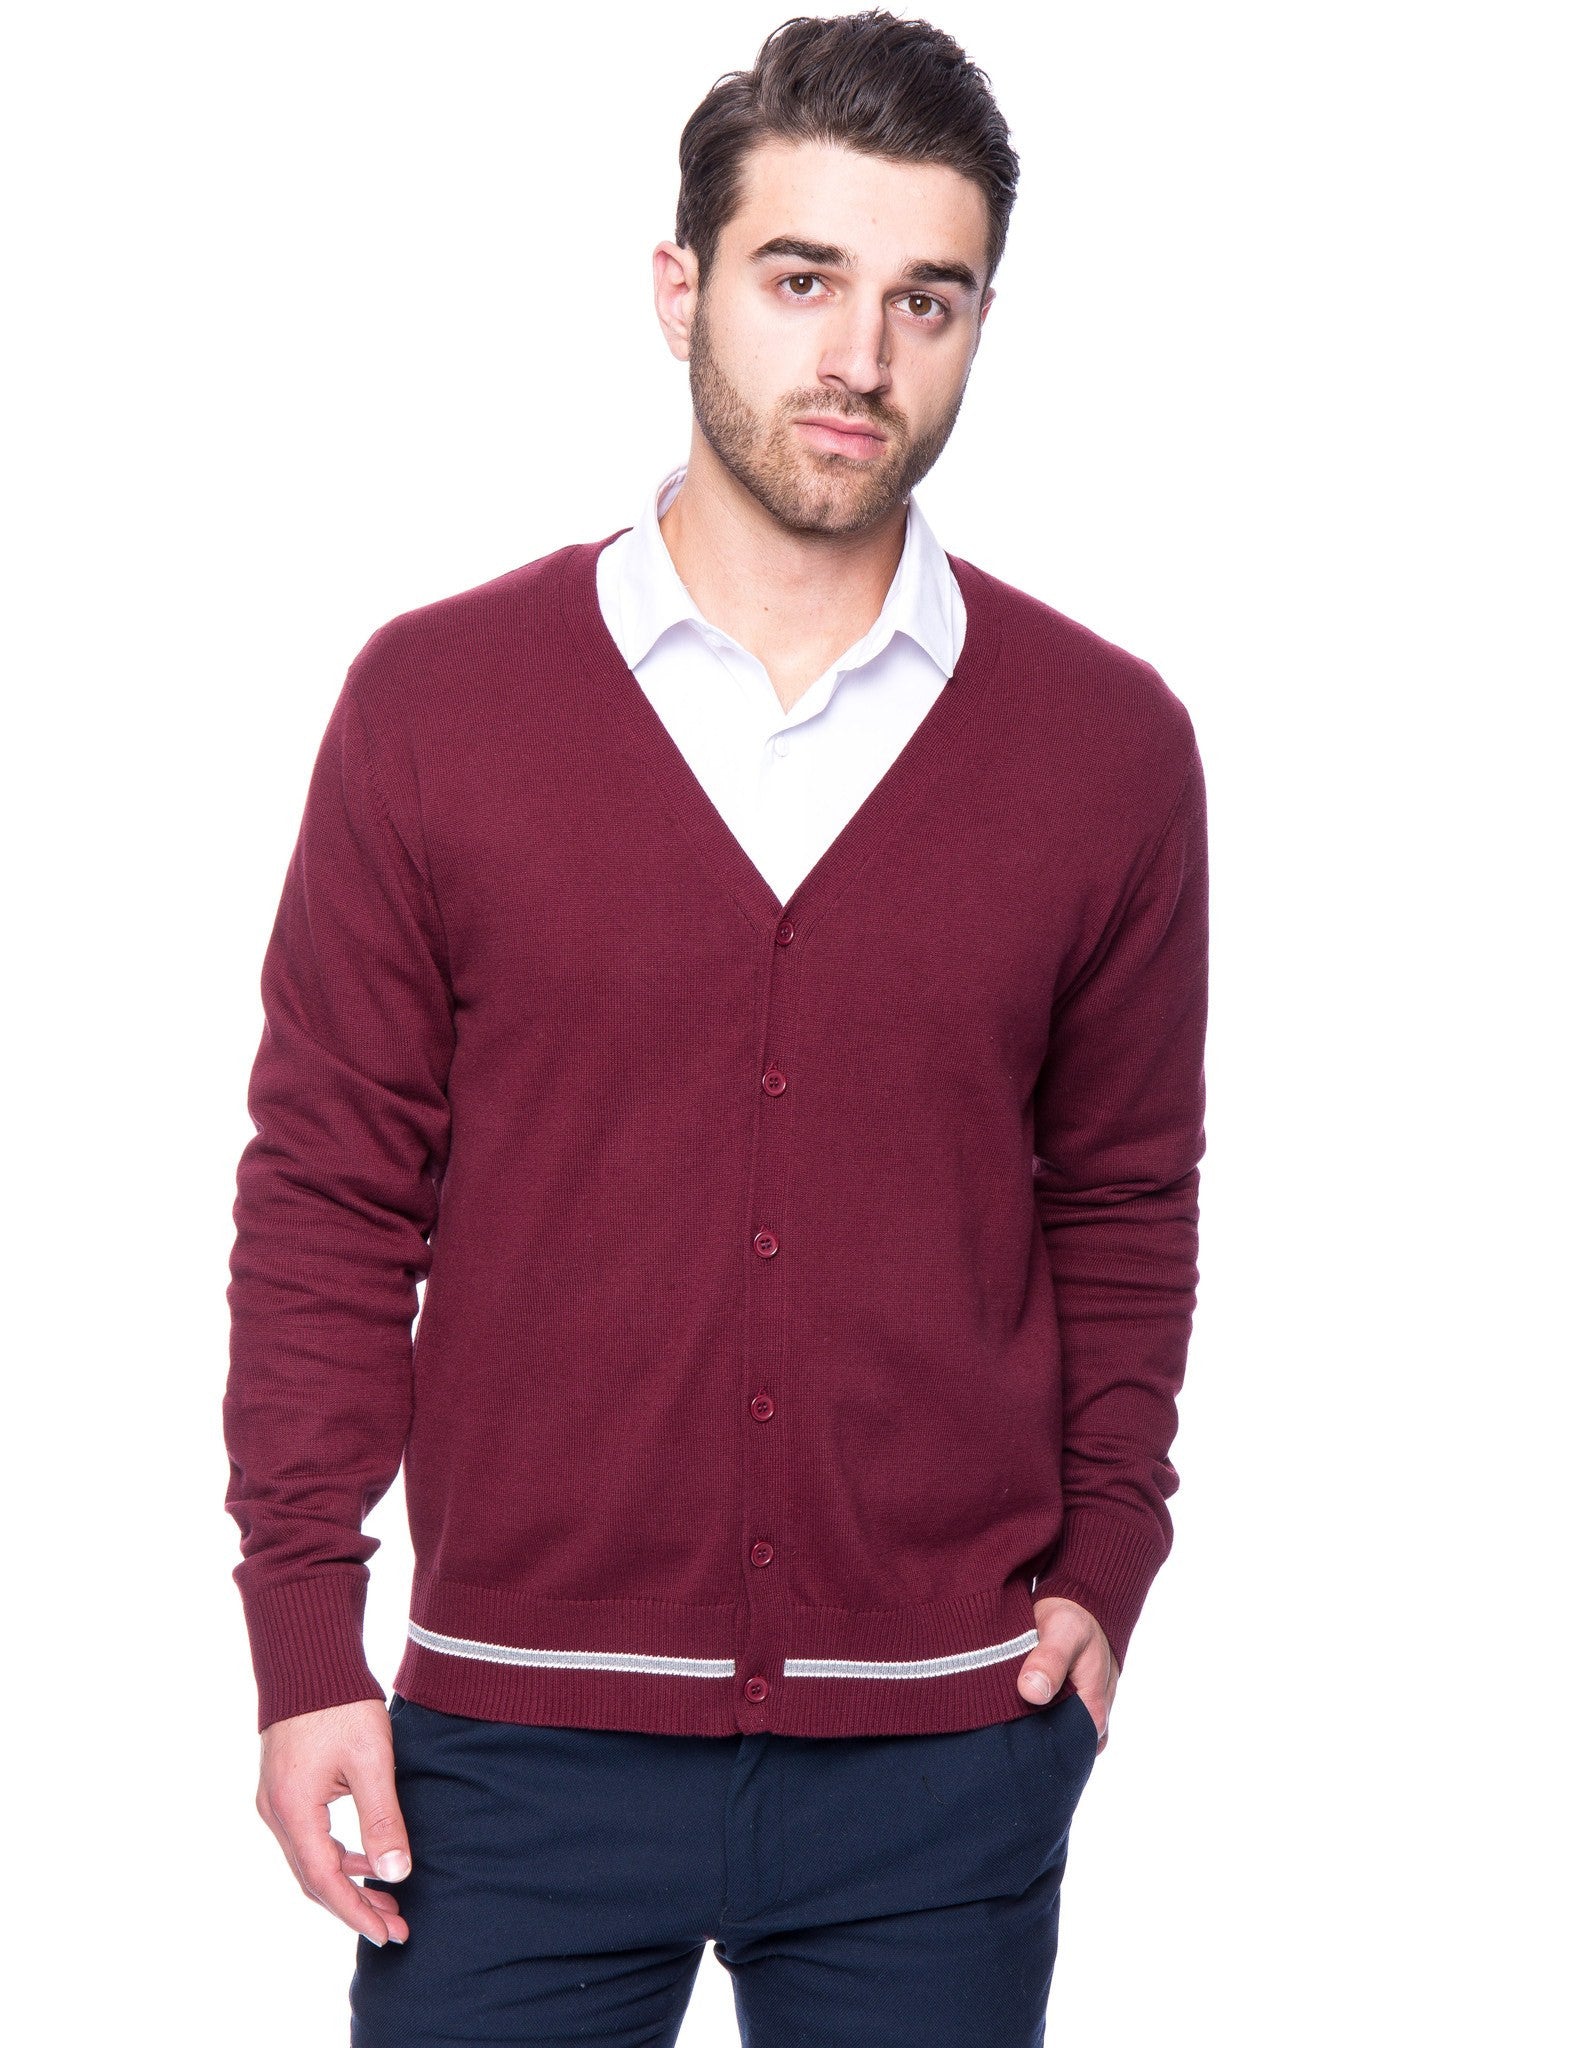 Box-Packaged Tocco Reale Men's 100% Cotton Cardigan Sweater